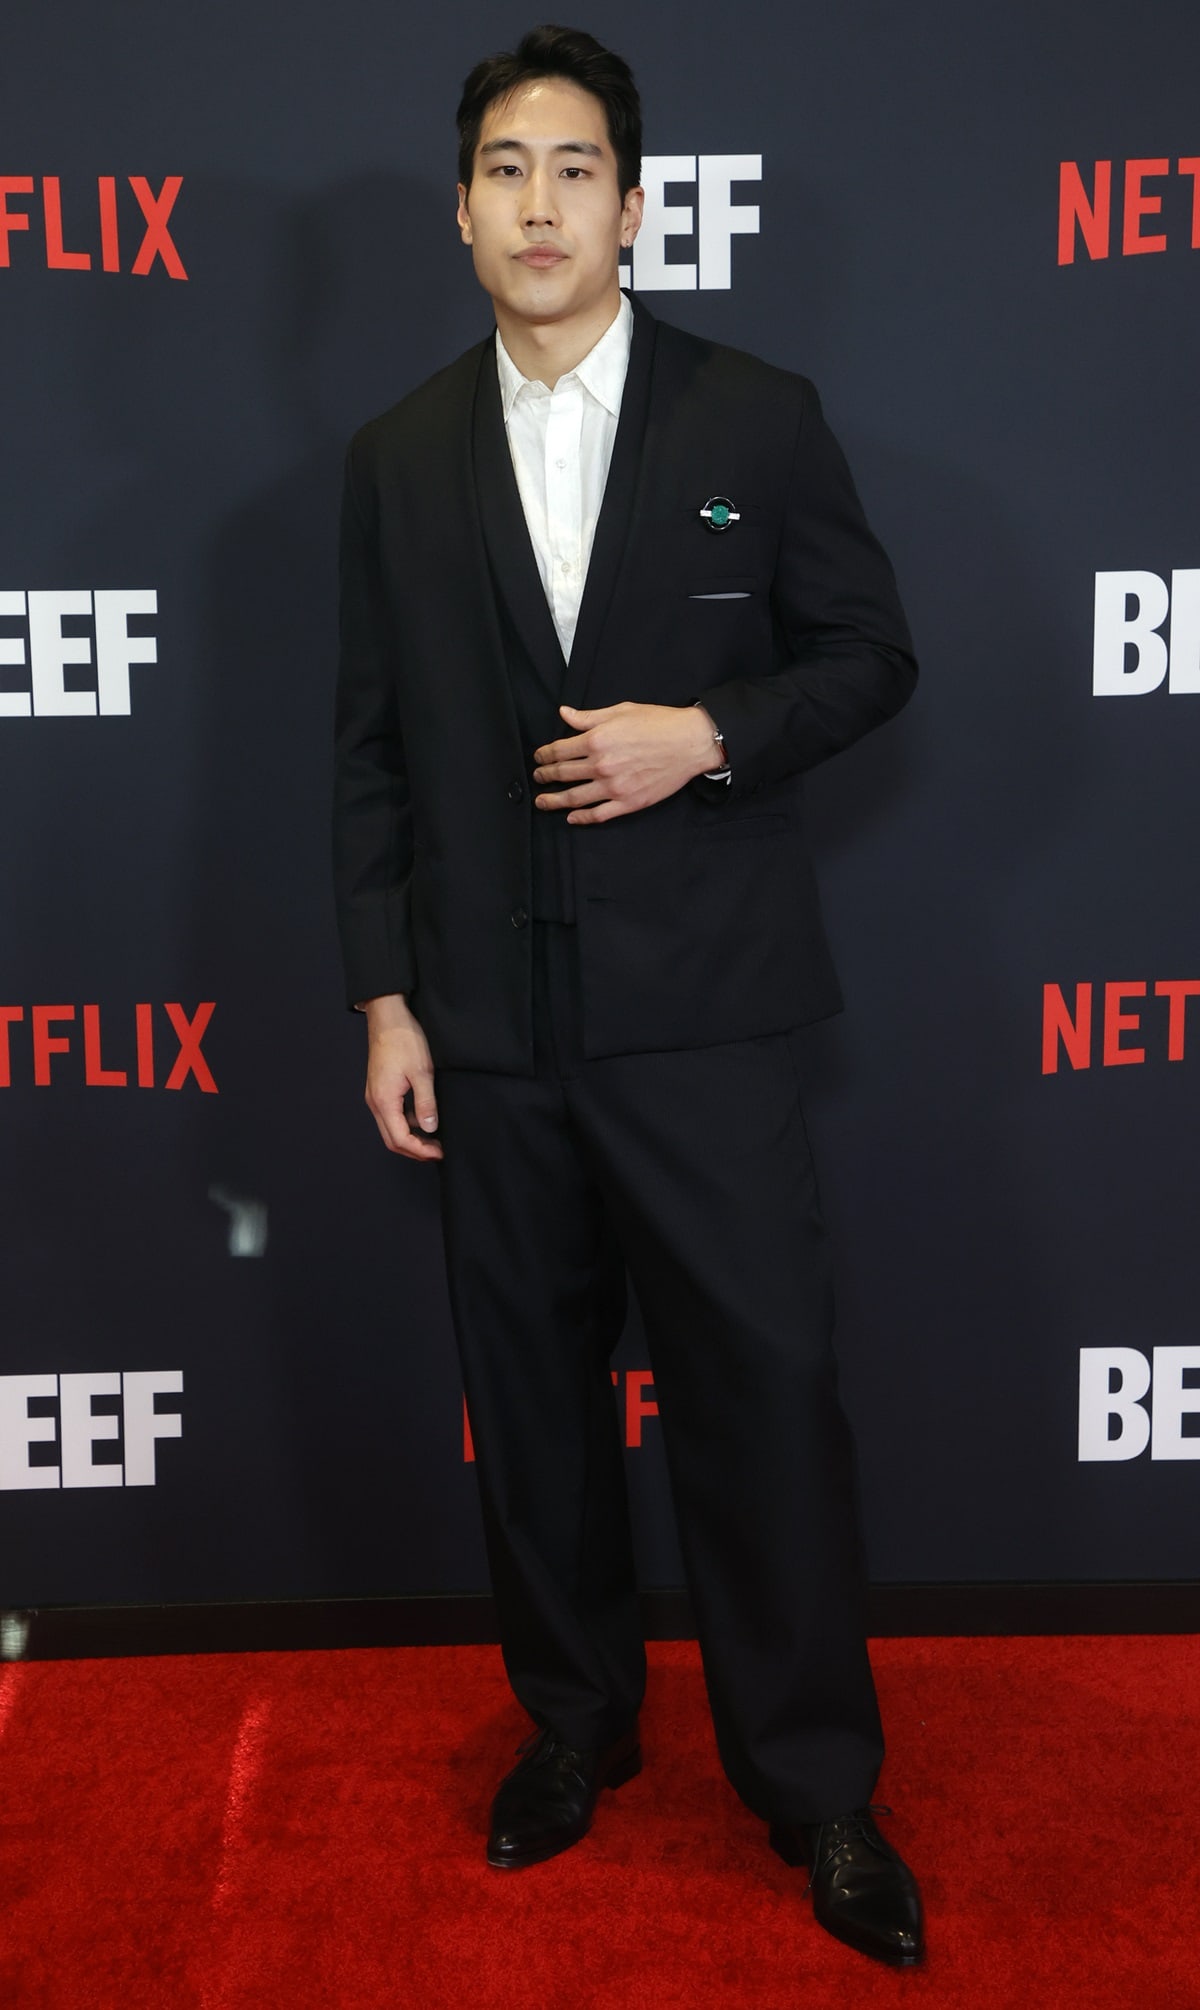 Korean-American actor Young Mazino has appeared on several network shows such as Blindspot, New Amsterdam, Tommy, Blue Bloods, and Prodigal Son